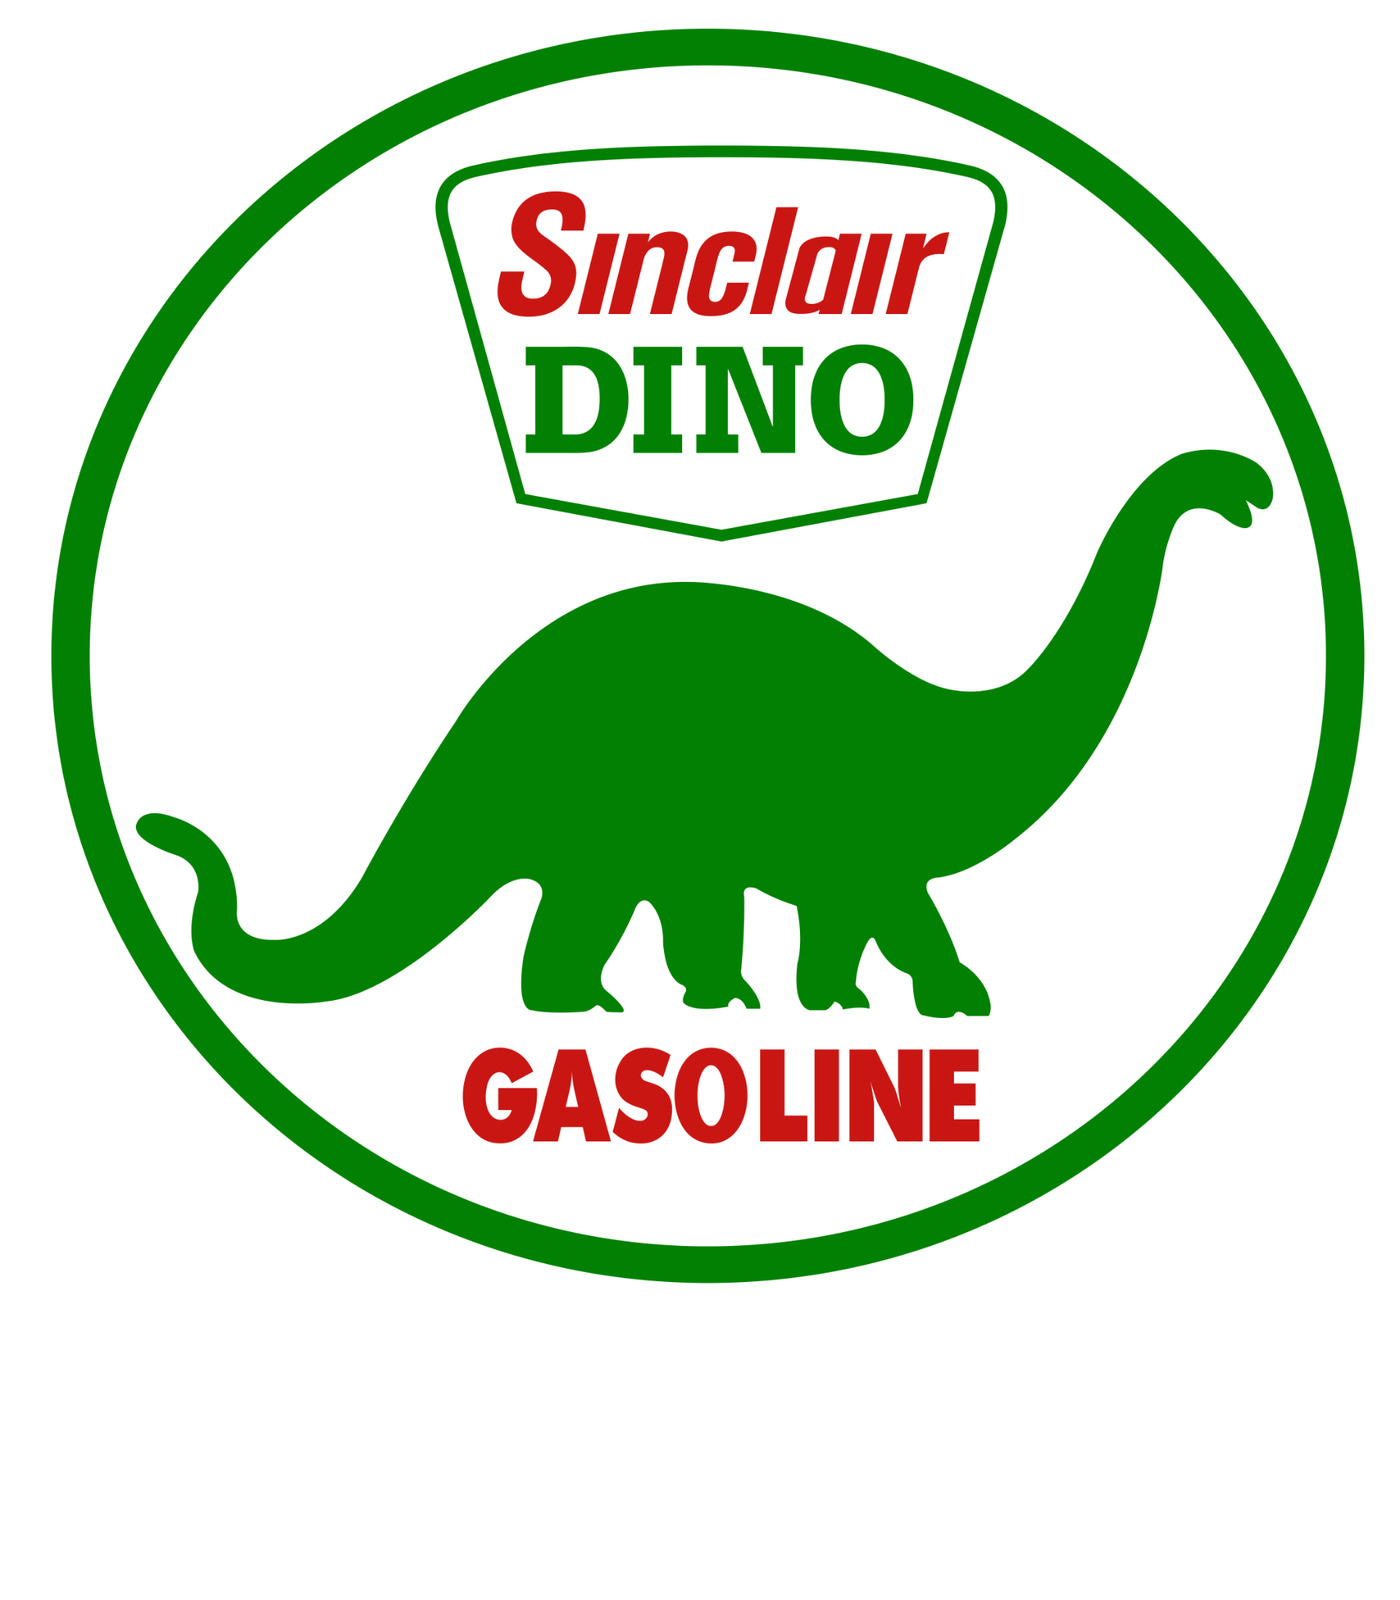 Sinclair Oil Gas sticker CIRCLE Vintage Vinyl Decal |10 Sizes with TRACKING